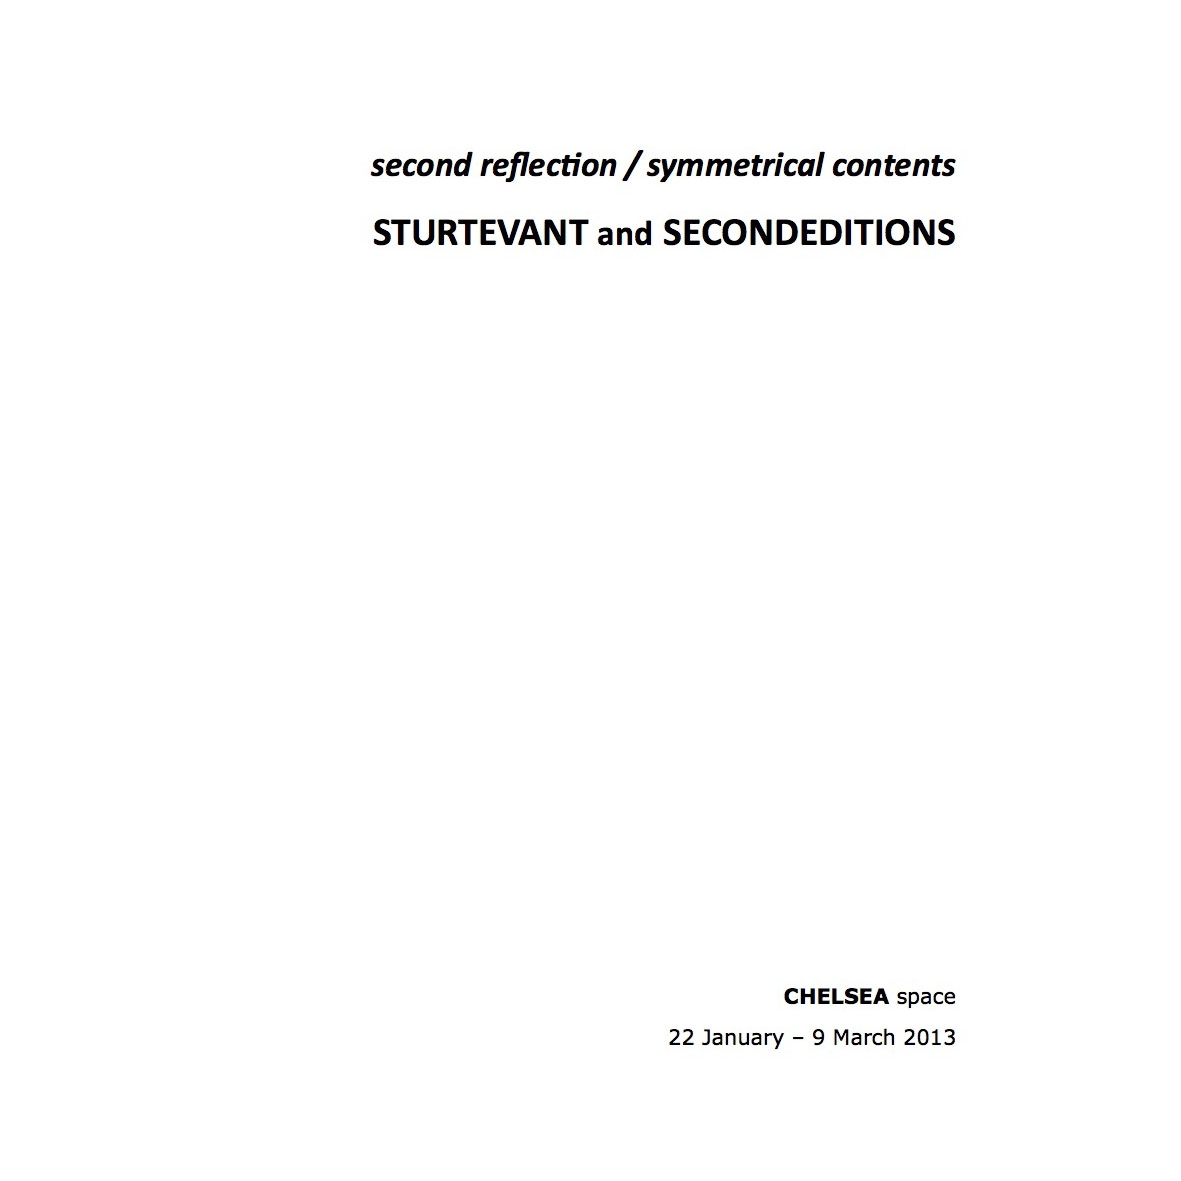 second reflection / symmetrical contents STURTEVANT and SECONDEDITIONS